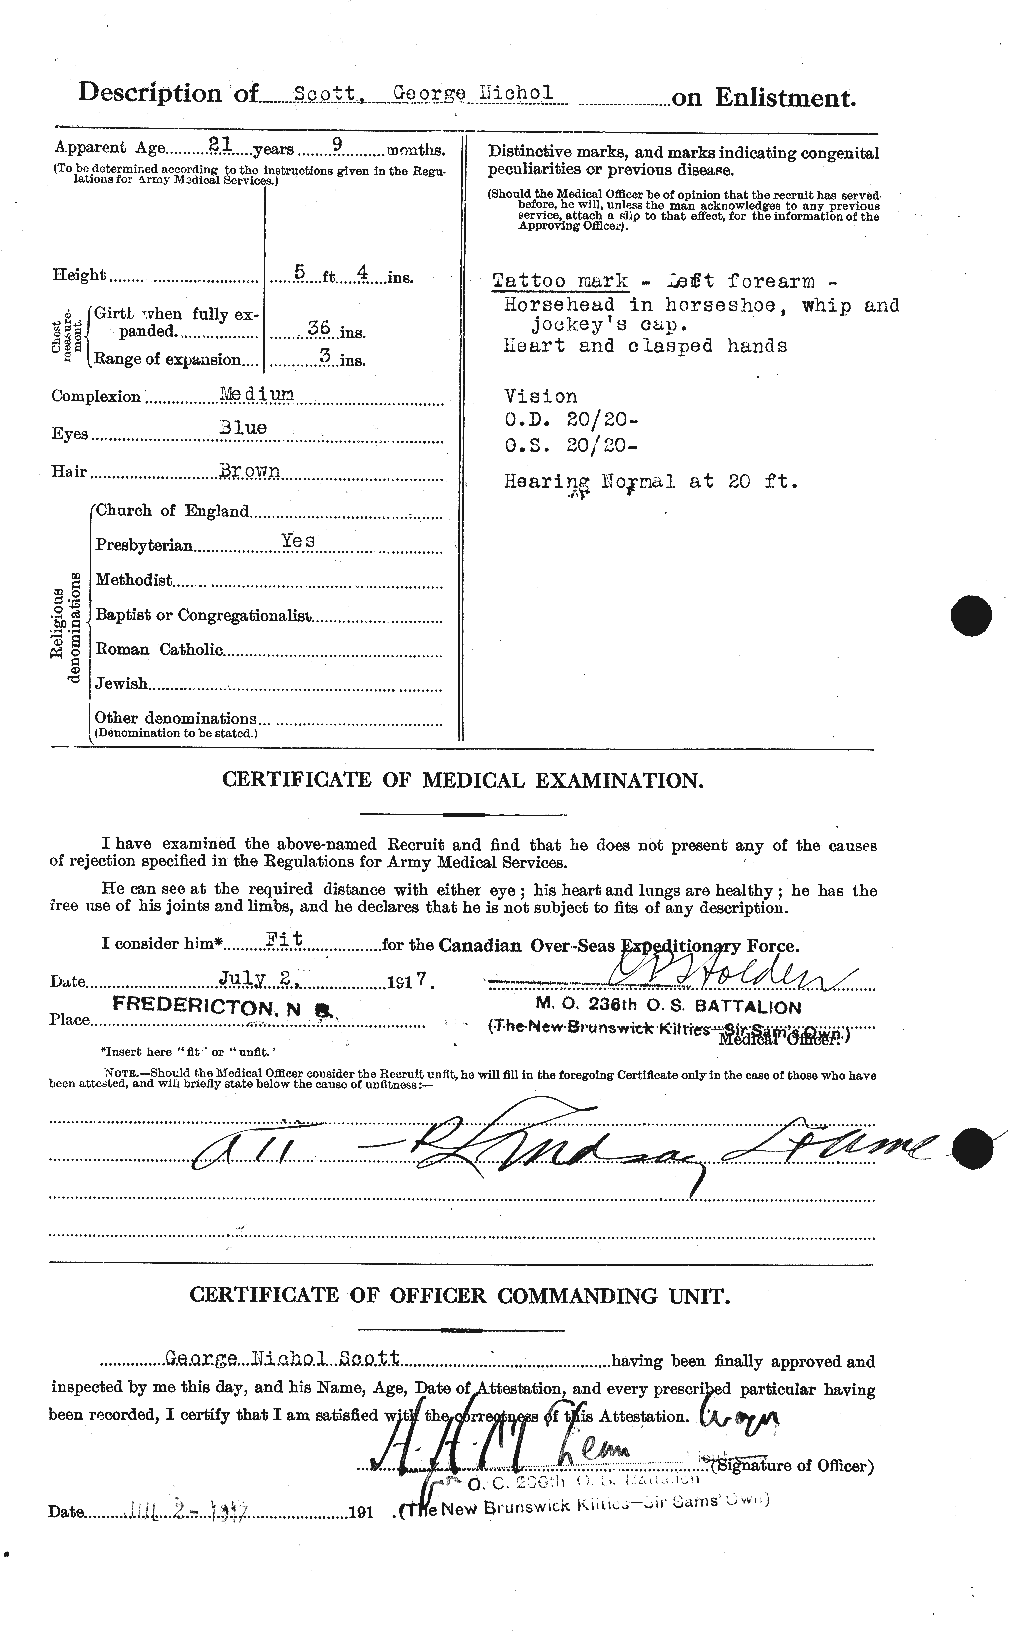 Personnel Records of the First World War - CEF 083539b